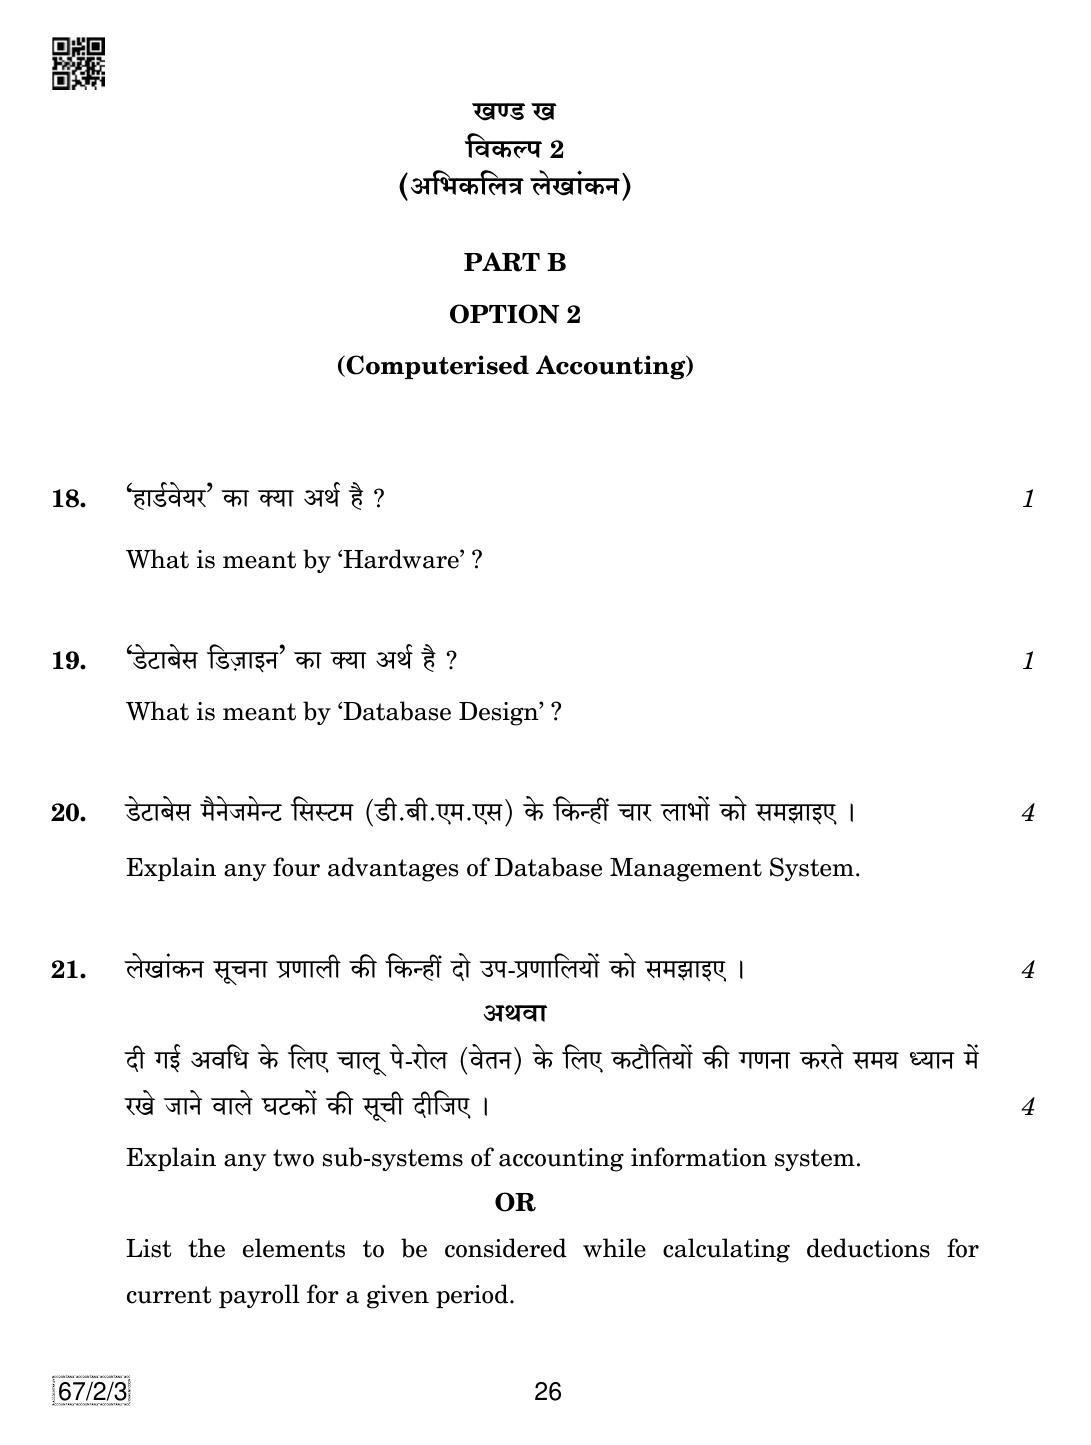 CBSE Class 12 67-2-3 Accountancy 2019 Question Paper - Page 26